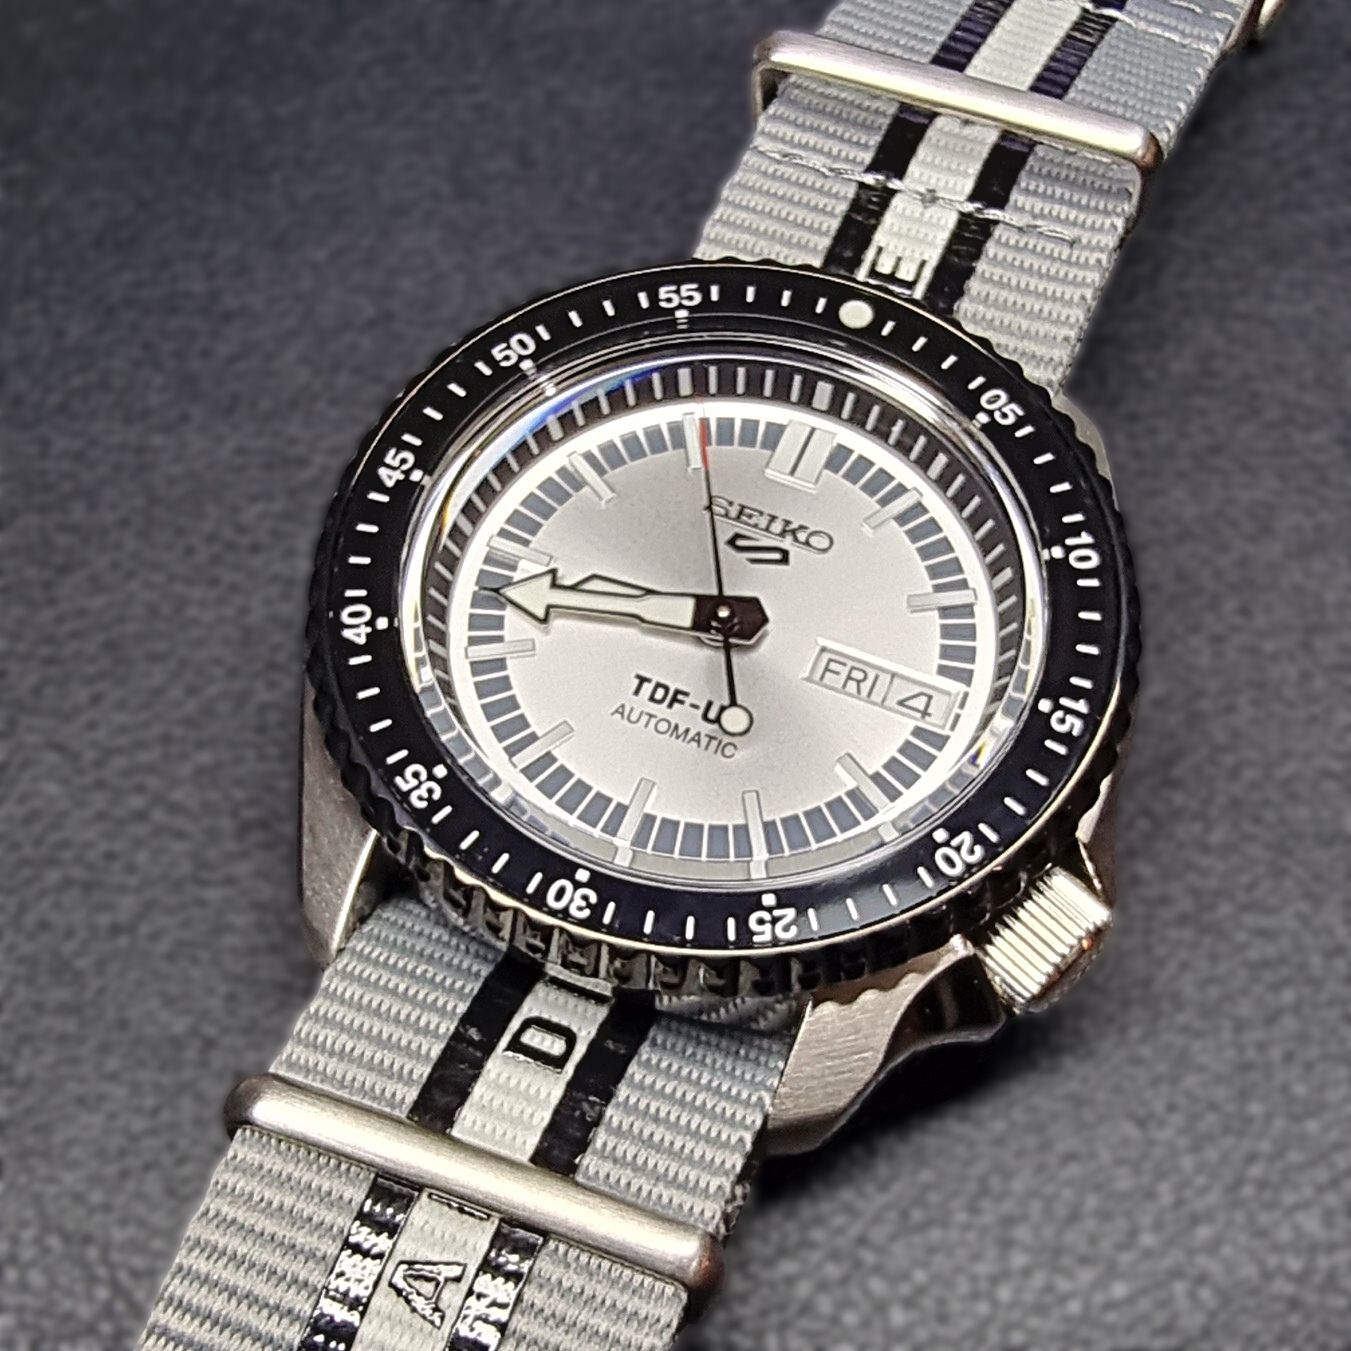 Seiko Ultraman Ultraseven SRPJ79 Limited Edition – speaking of watches